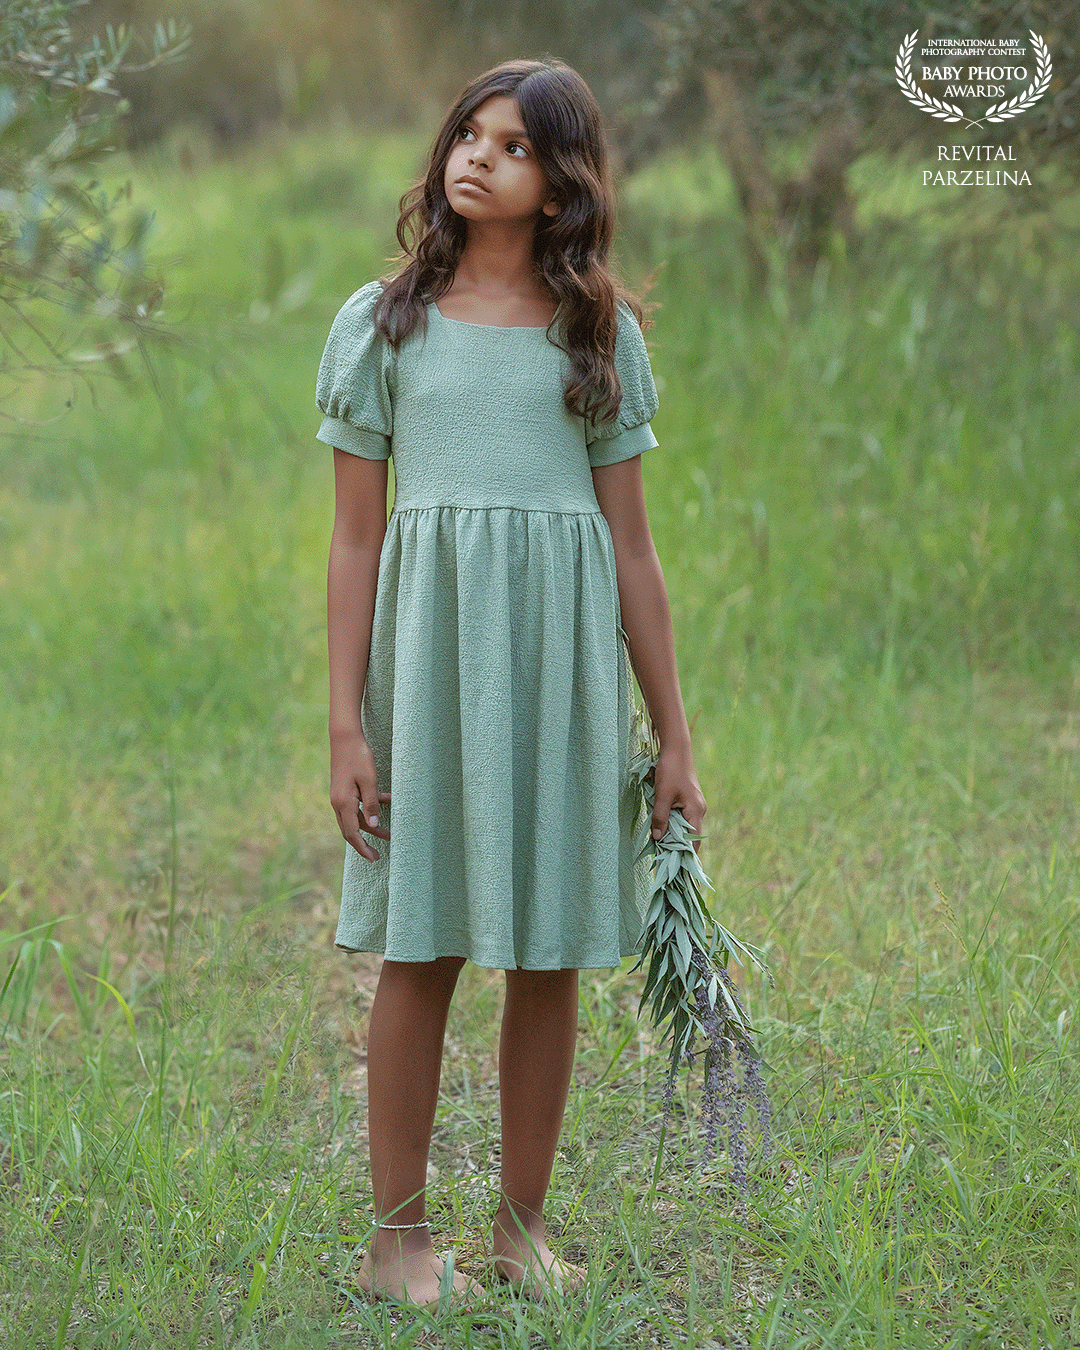 "In a verdant meadow, a girl graces the scene in a green dress, holding radiant purple flowers—a captivating fusion of nature's hues in a symphony of color and grace."